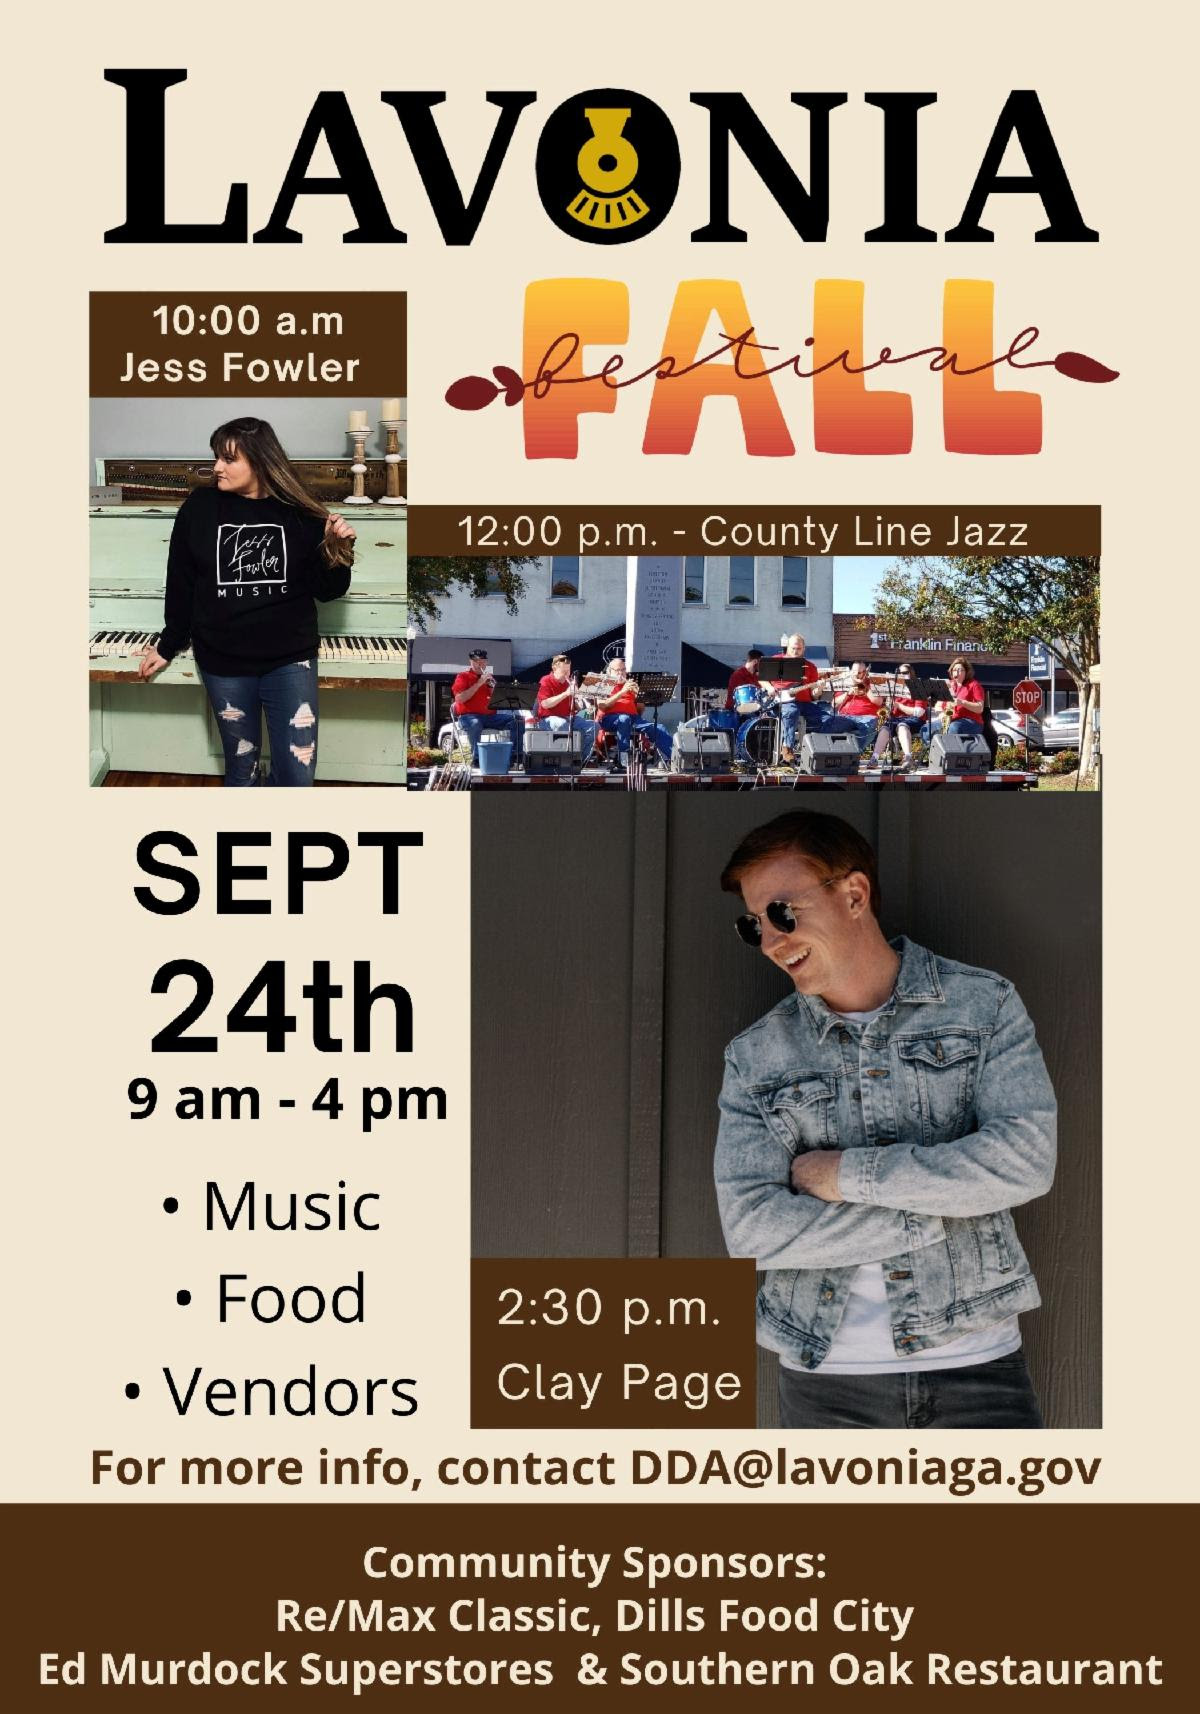 Lavonia Fall Festival Bigger Than Ever This Year 92.1 WLHR